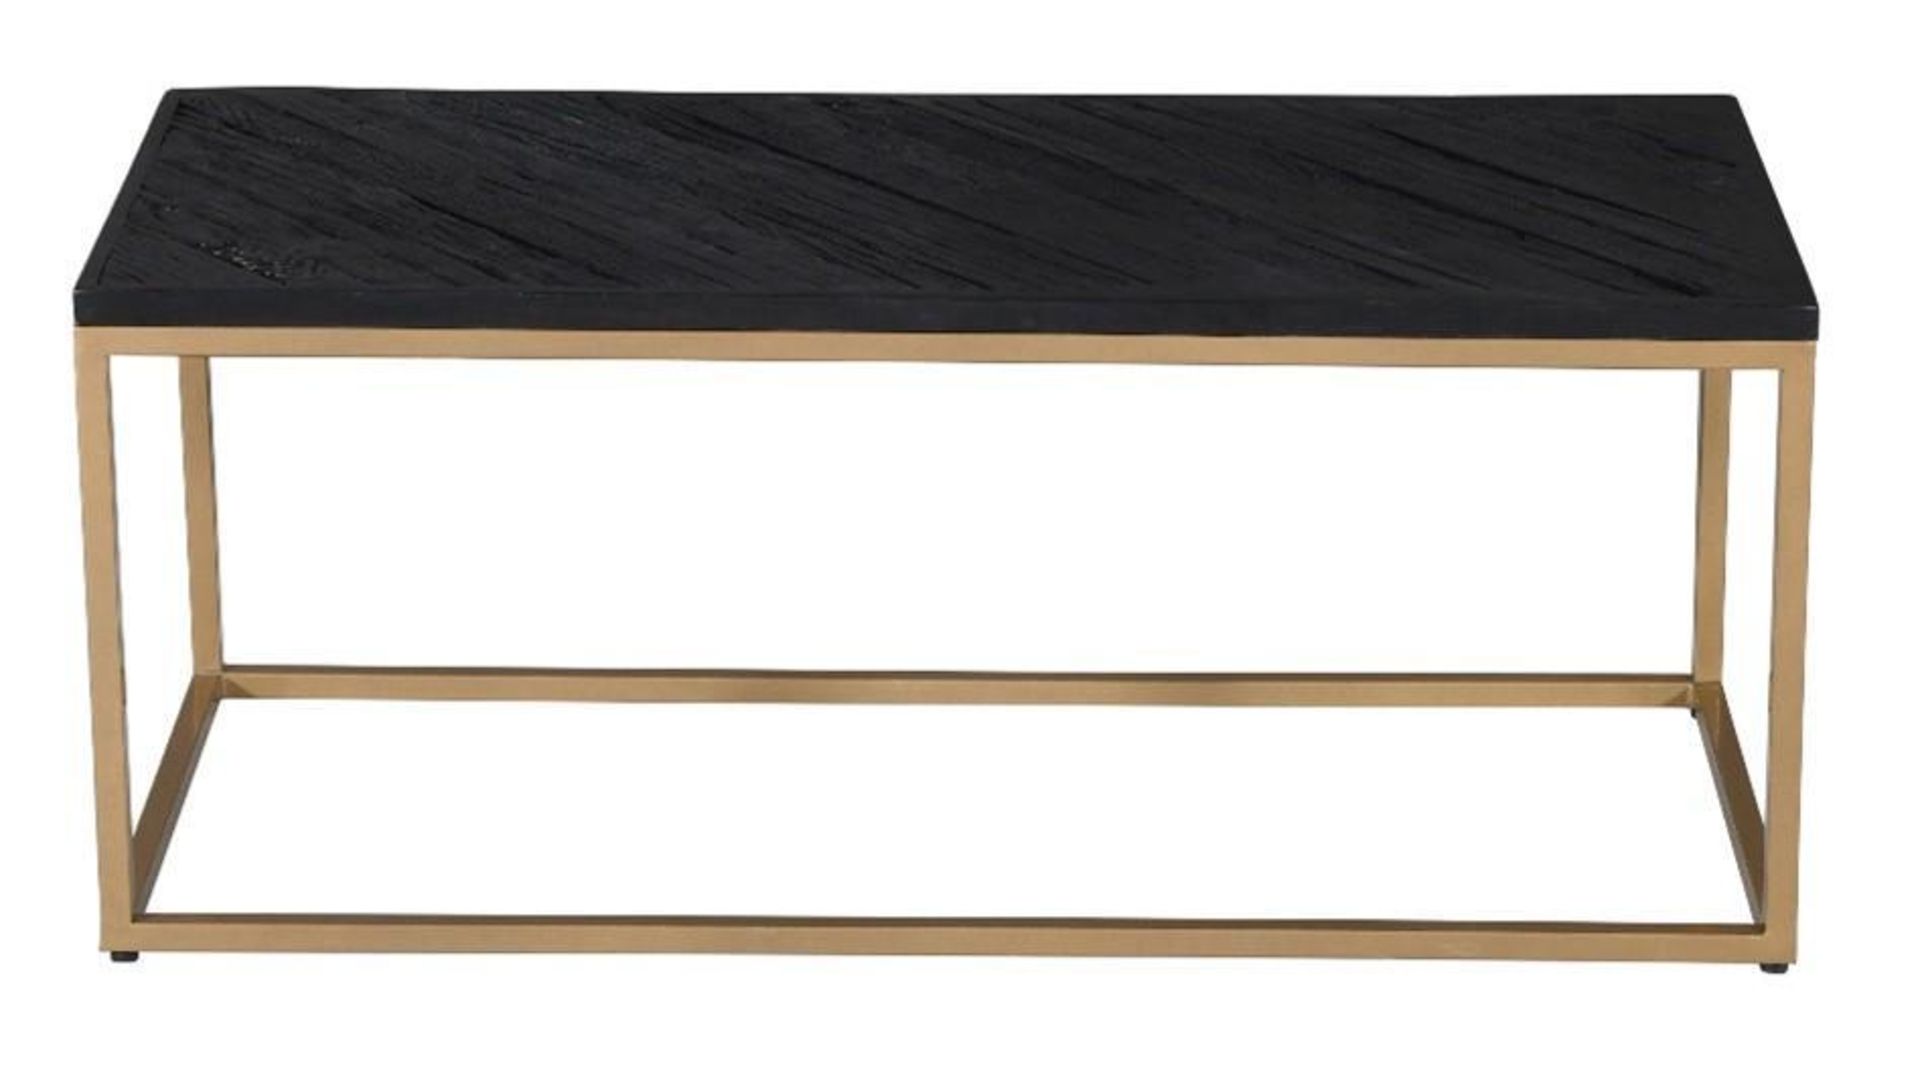 *BRAND NEW* Trisulli large planked black ash coffee table with gold metal base. RRP: £269.99